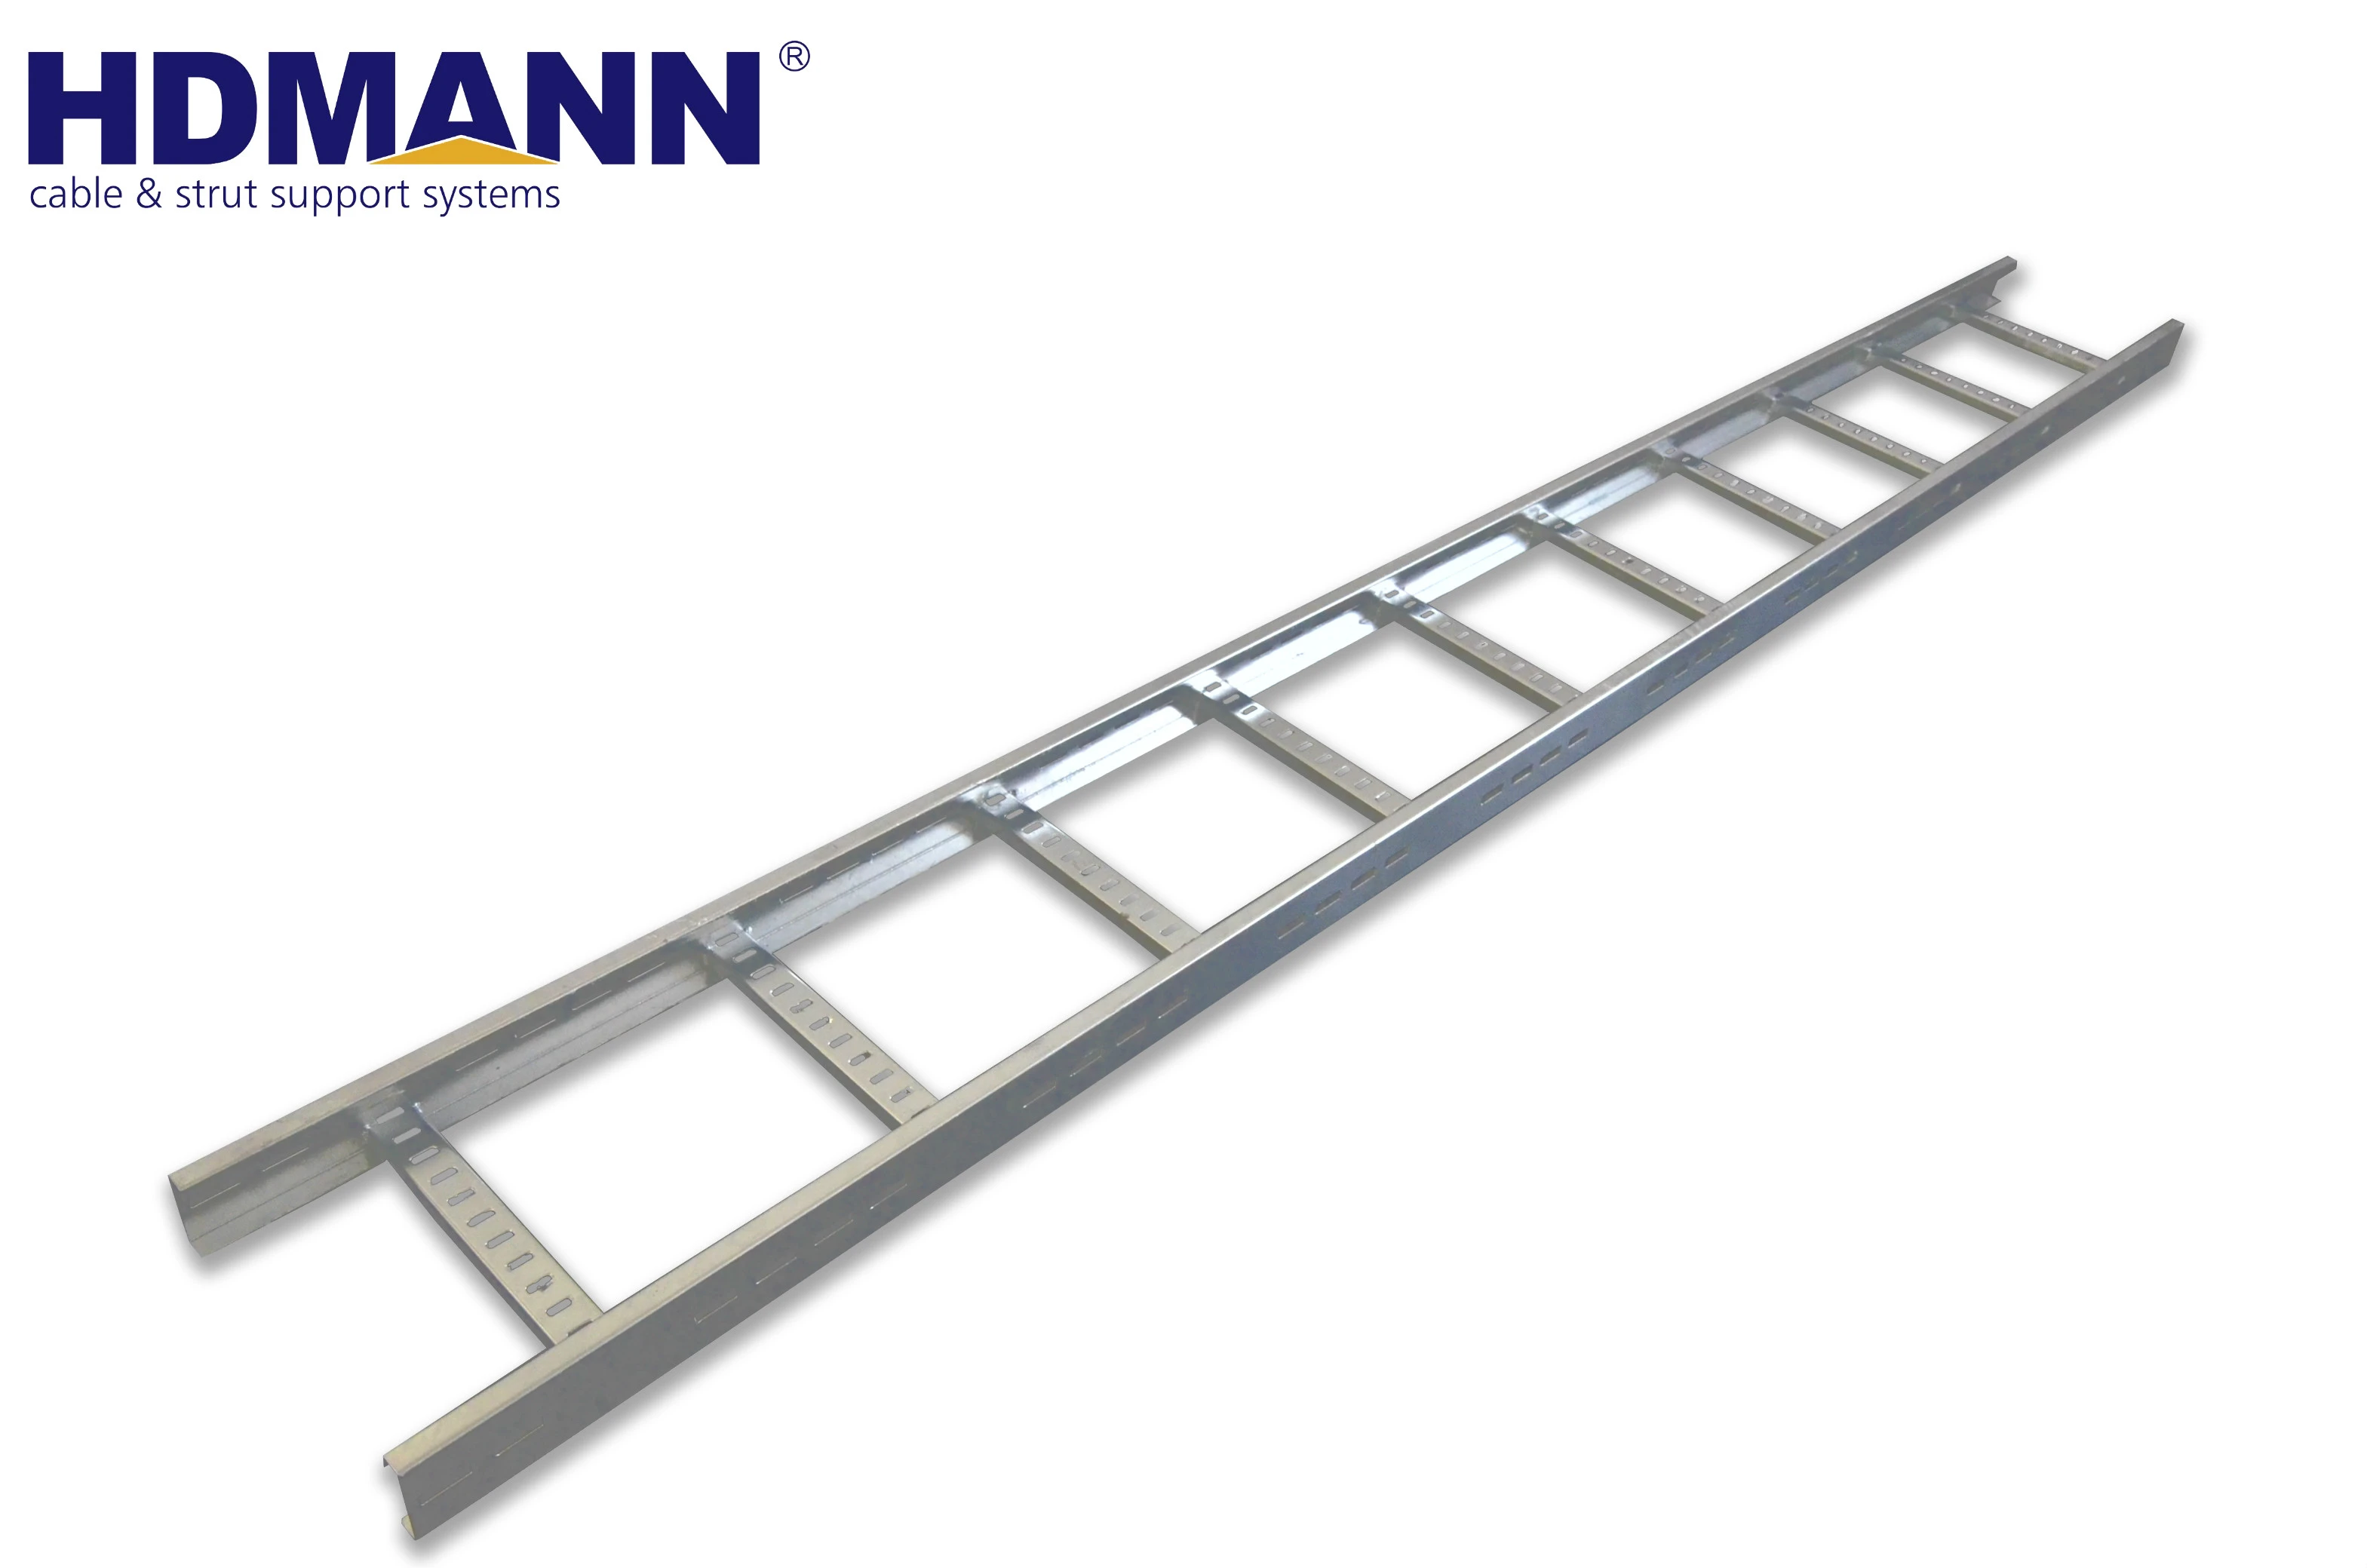 HDMANN SS316 Marine Ladder Type Cable Tray Cable Ladder Price